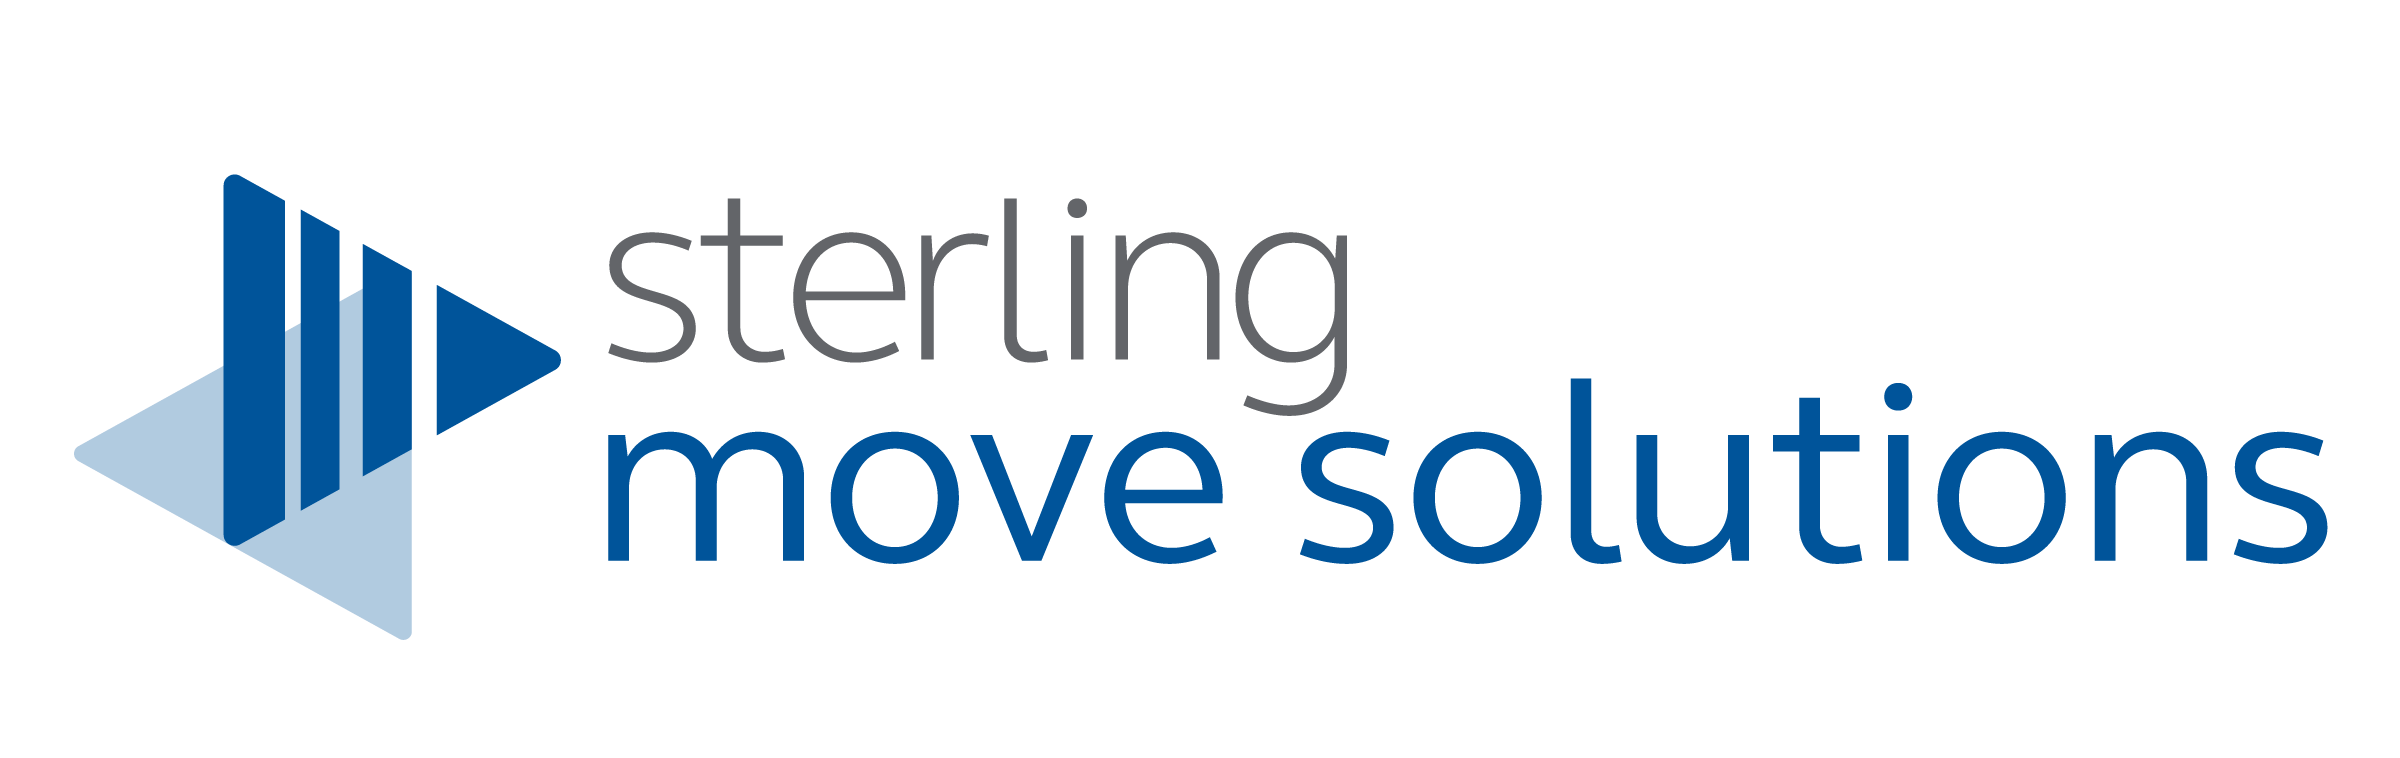 STERLING MOVE SOLUTIONS LOGO